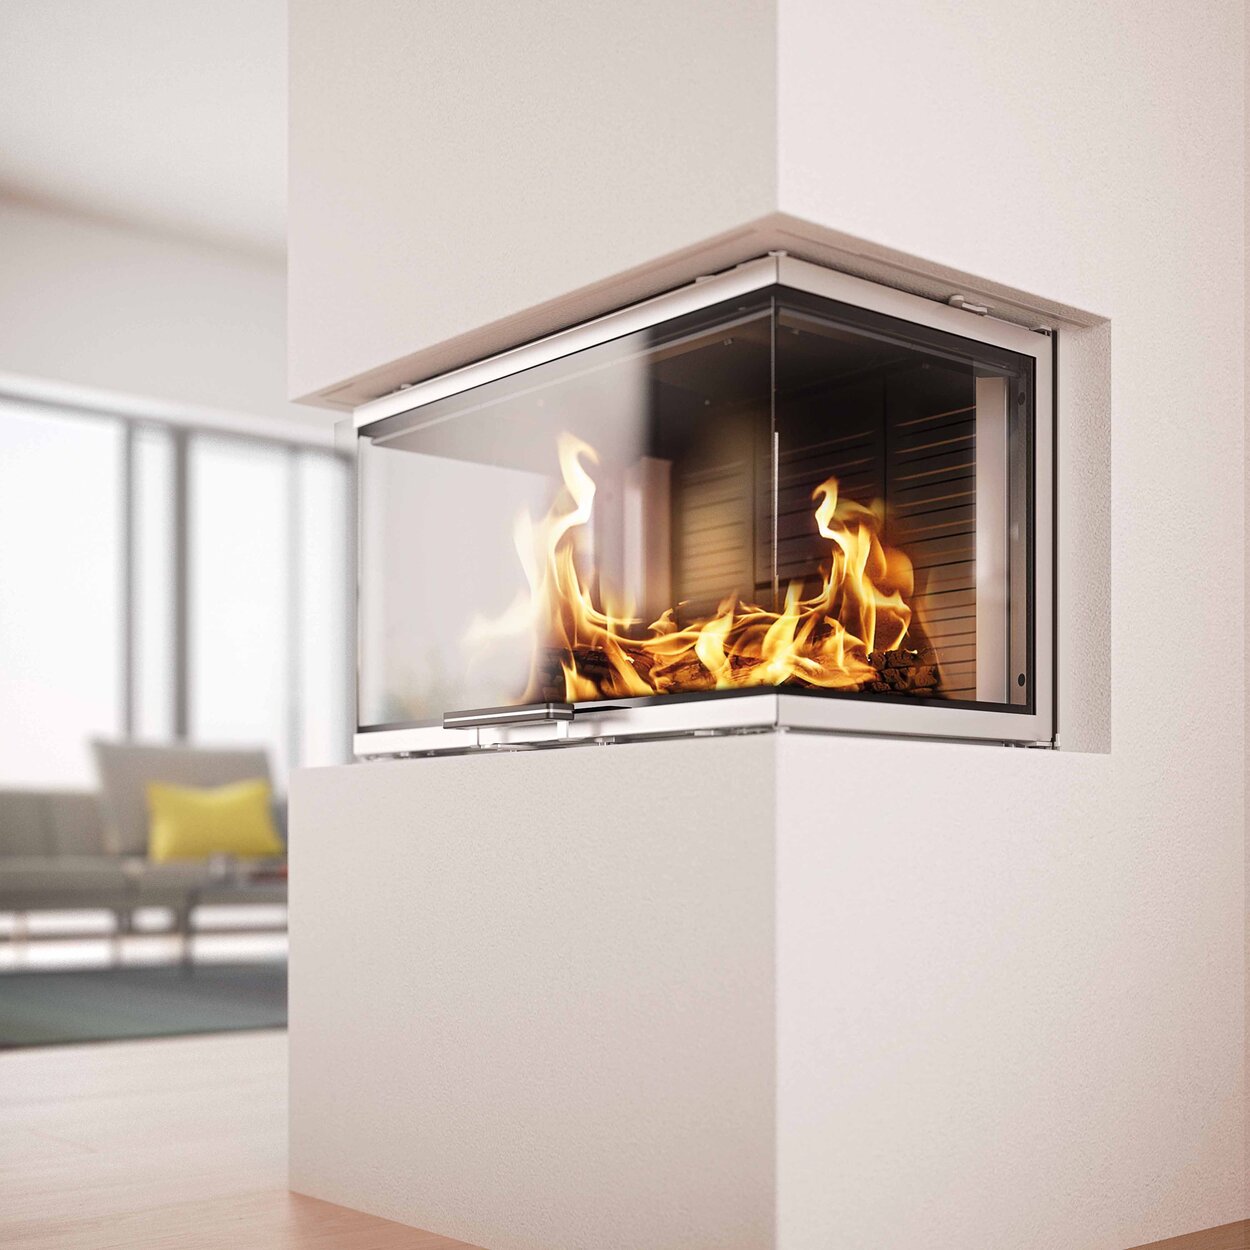 Wood fireplace VISIO 3 with elegant stainless steel frame